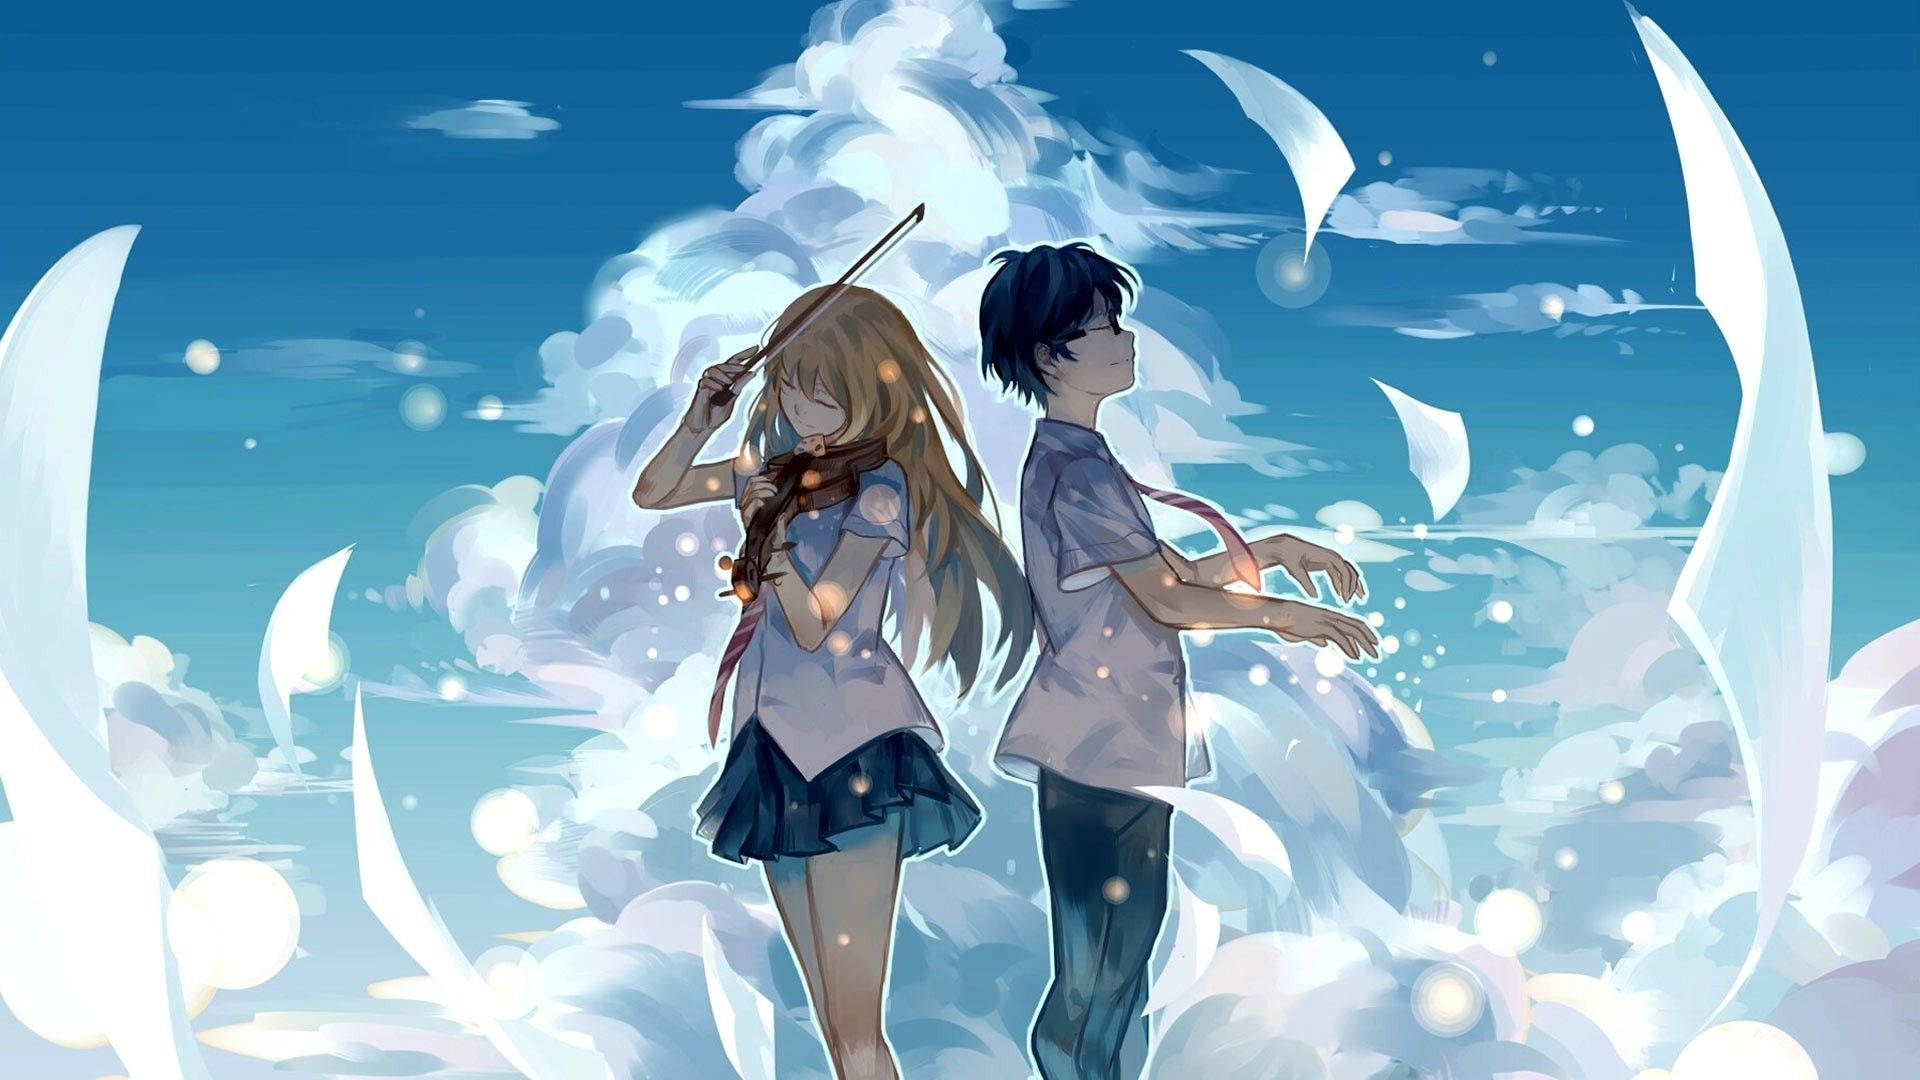 Your Lie In April Anime Aesthetic